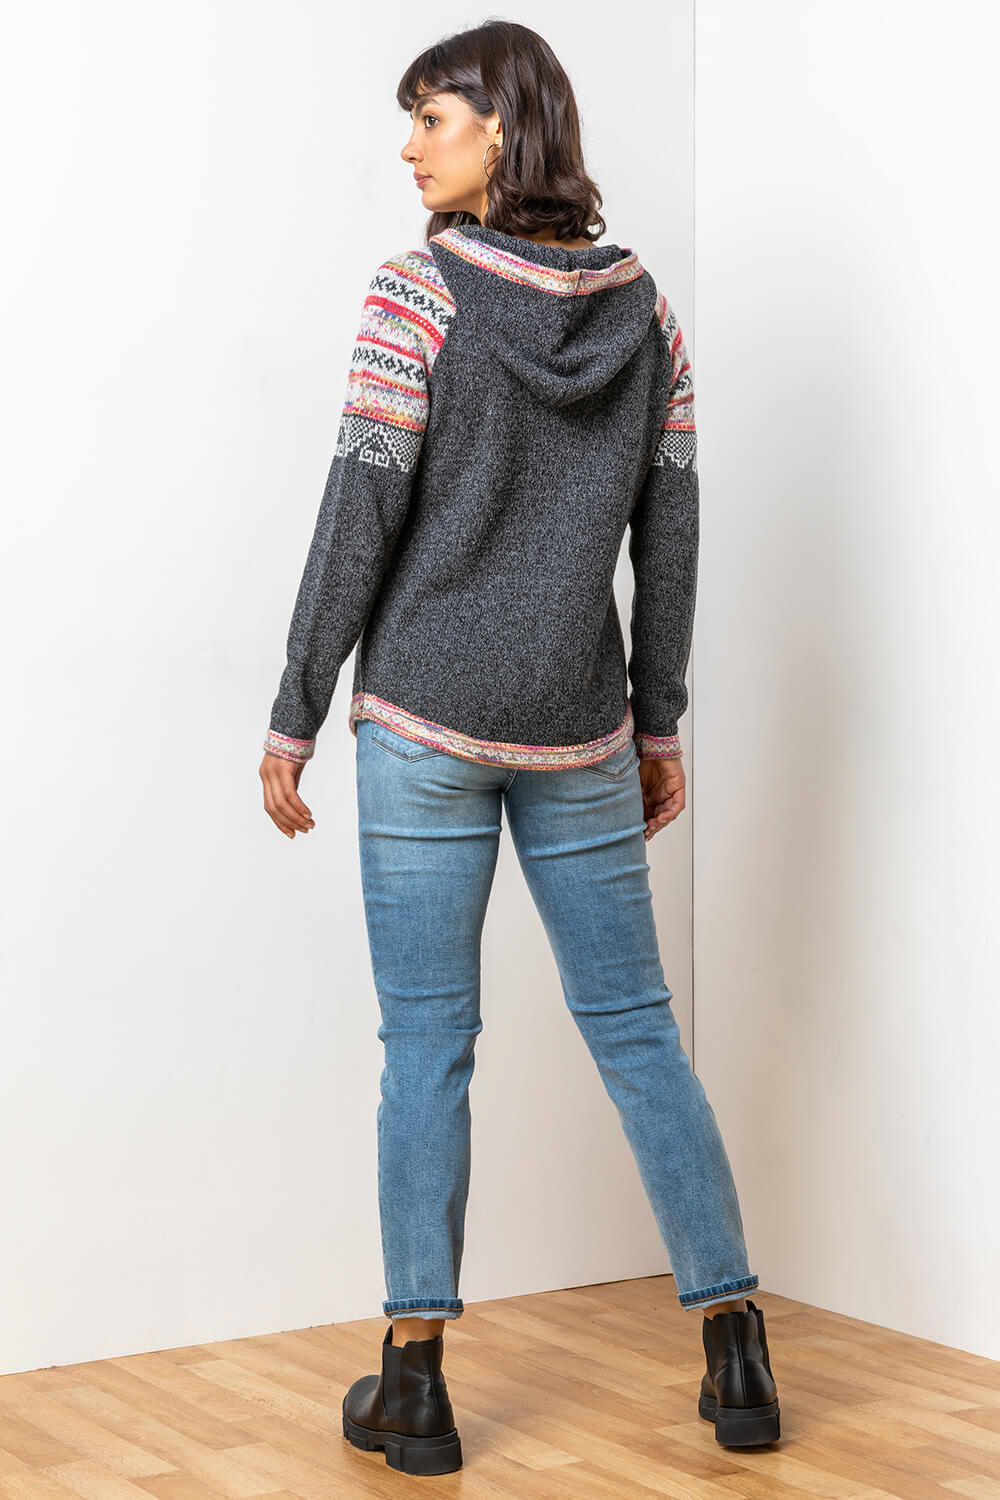 Charcoal Nordic Print Hooded Jumper, Image 2 of 5